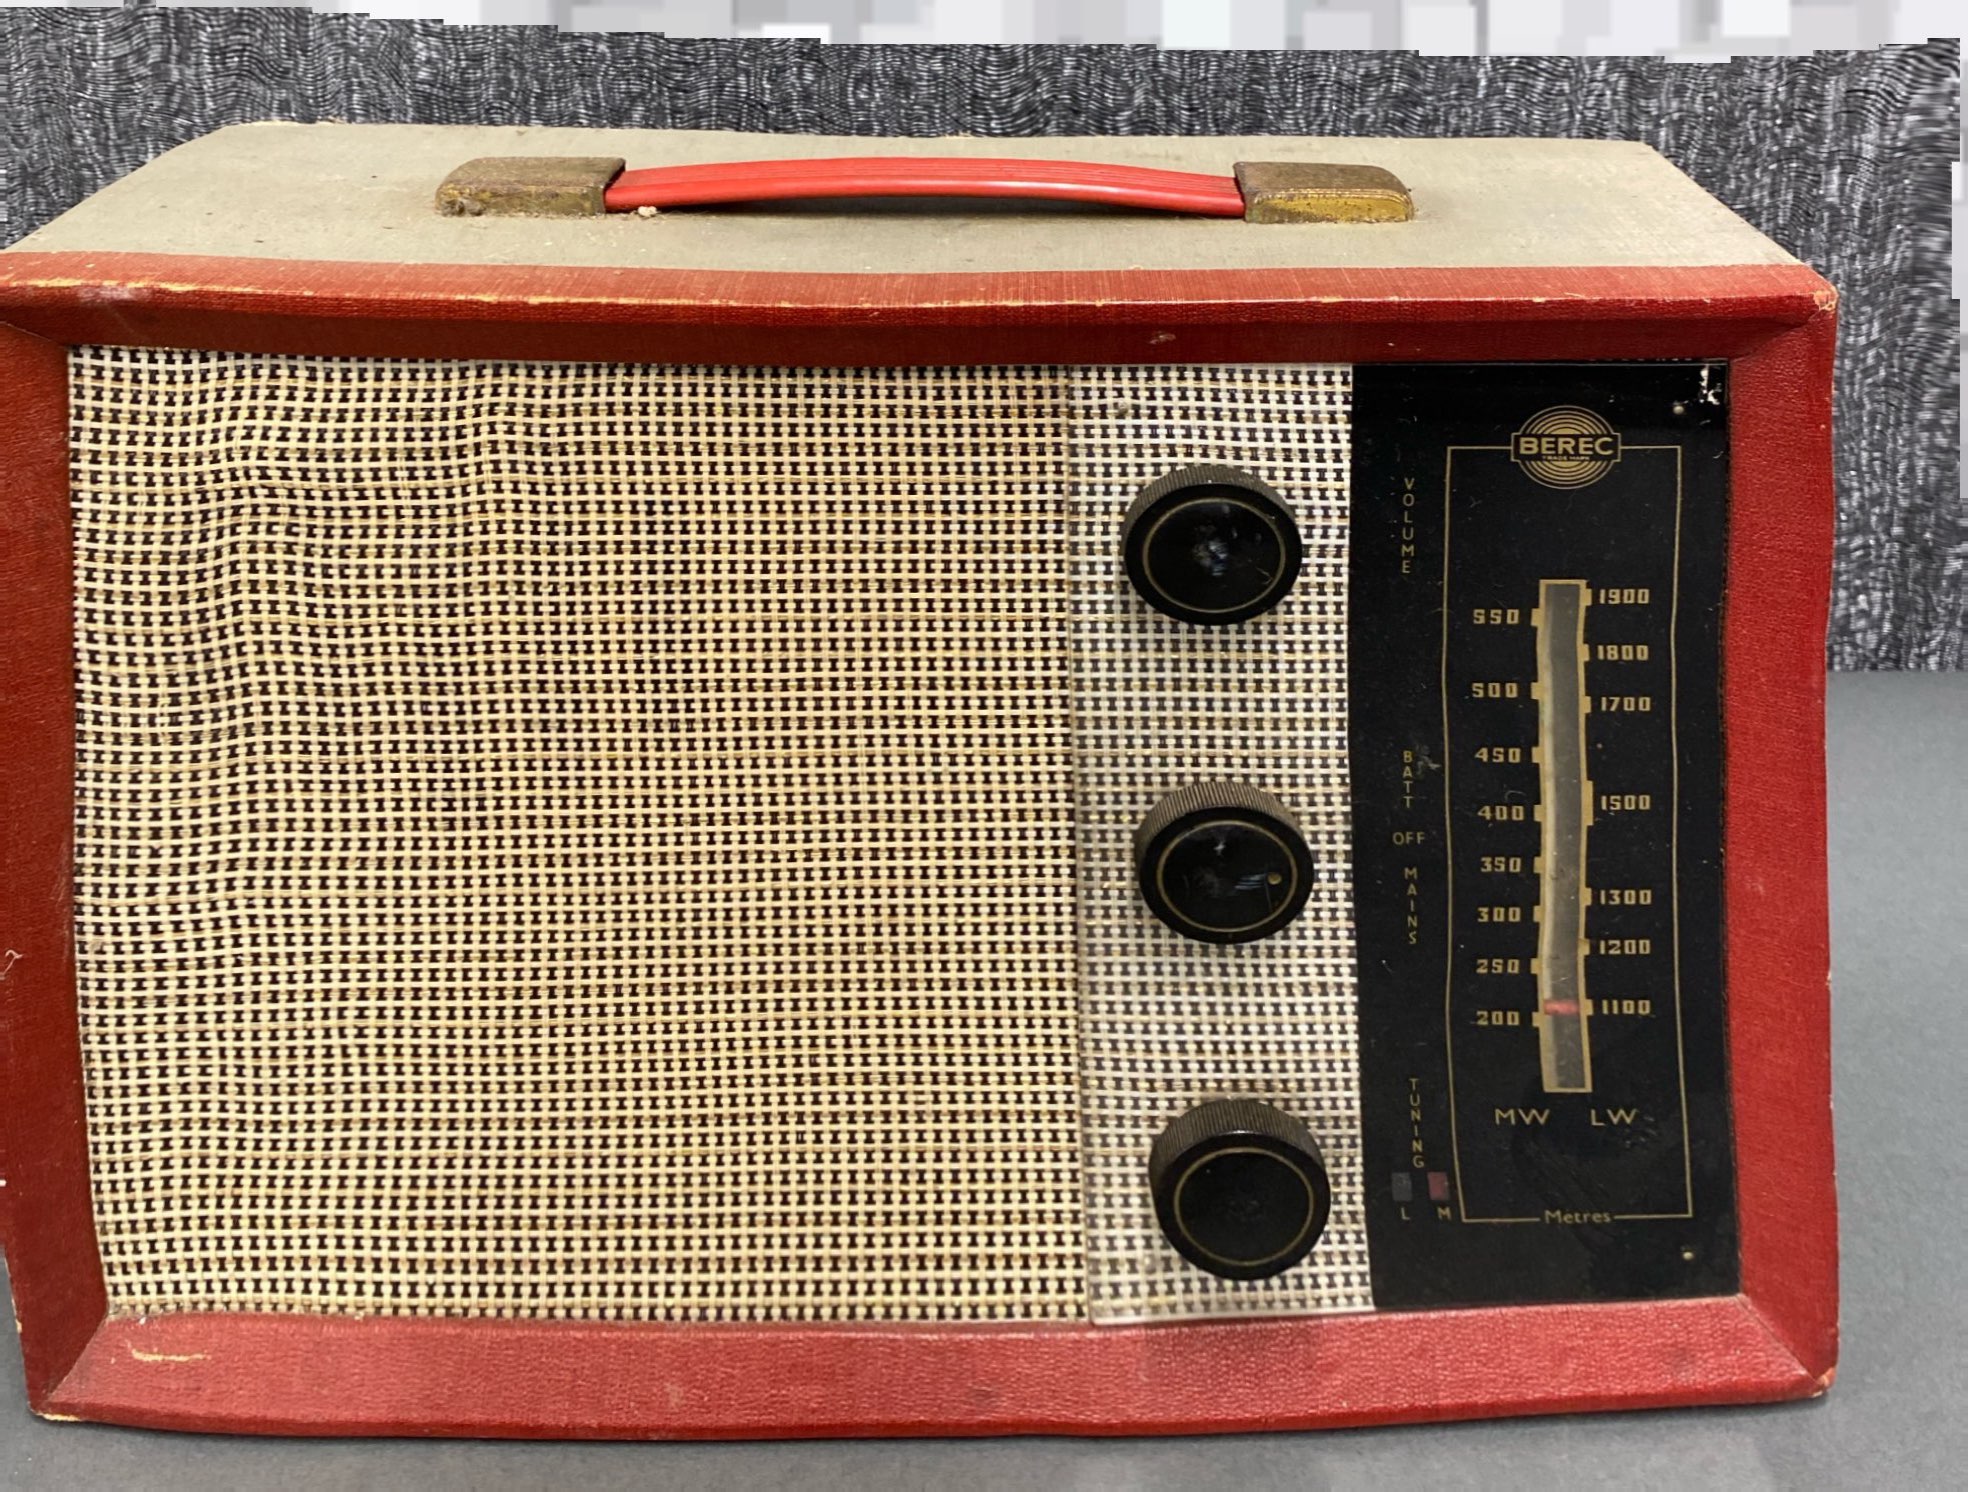 An early Perdio continental PR73 together with a Berec radio. - Image 2 of 5